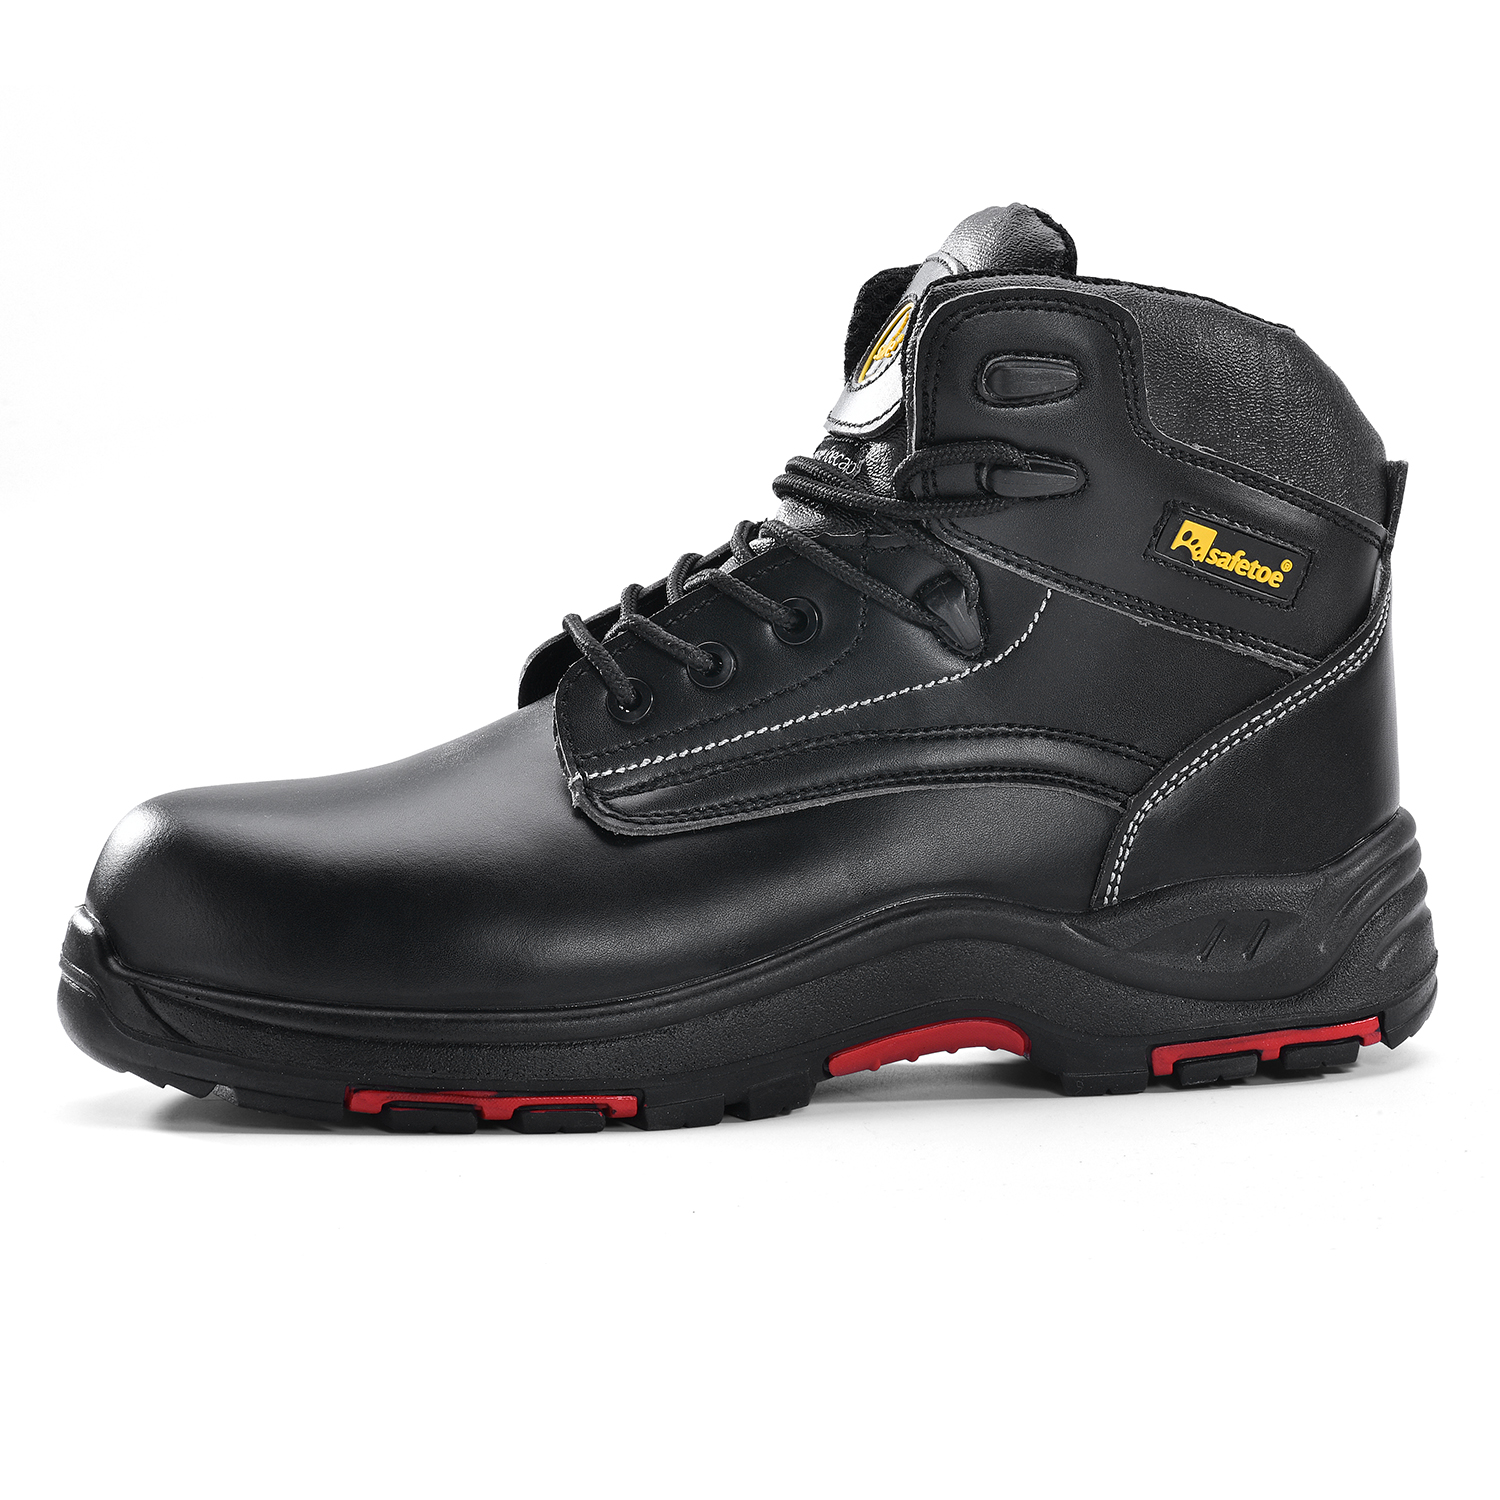 Details about   S3 Waterproof Safey Boots Mens Leather Work Shoes Composite Toe Cap Trainer Size 